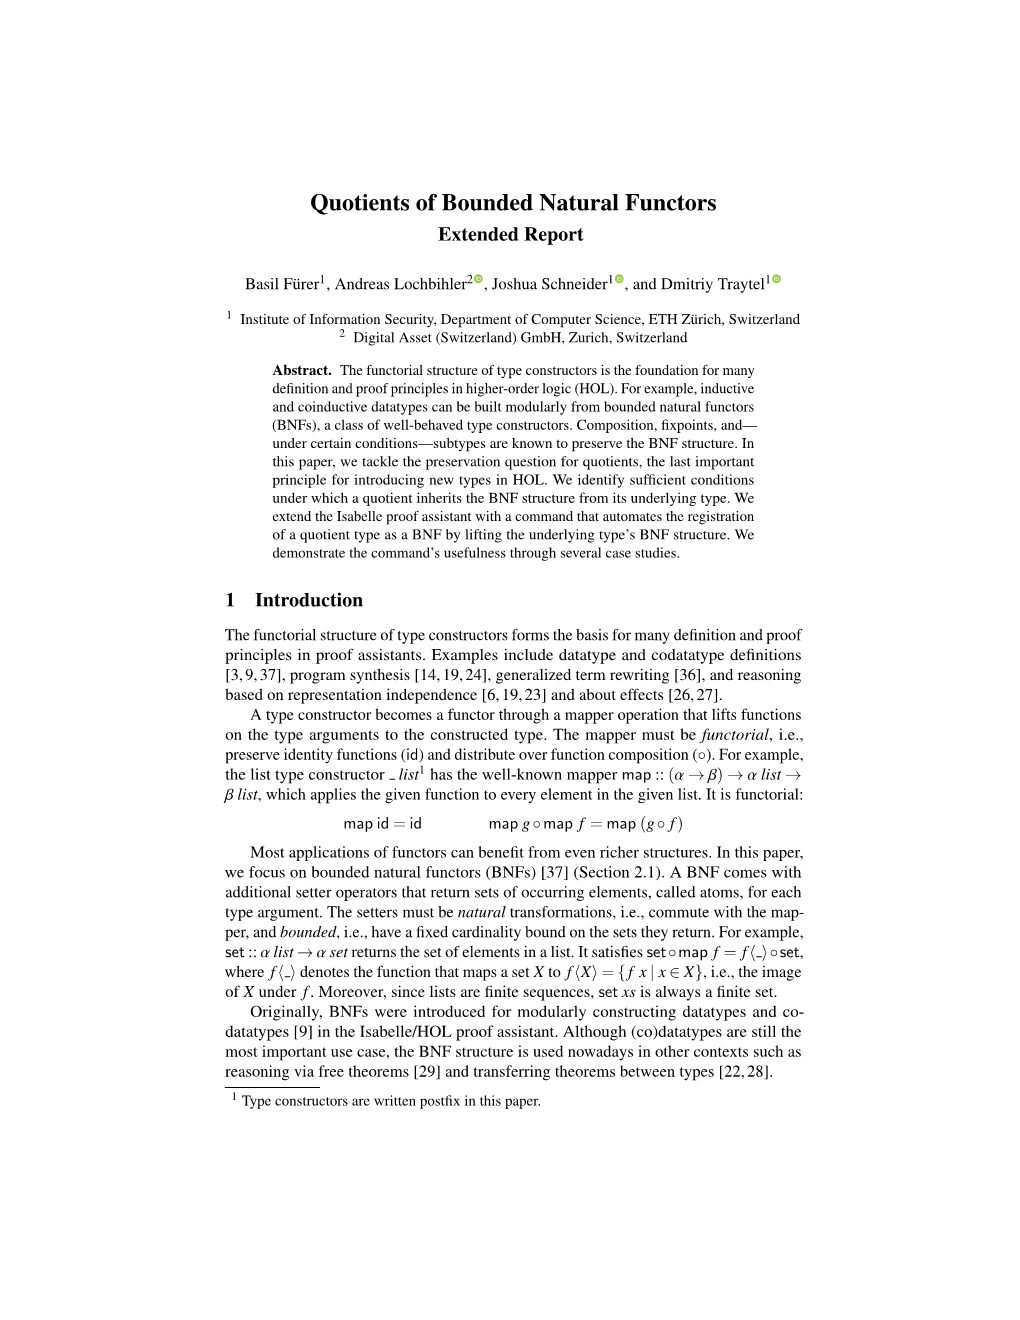 Quotients of Bounded Natural Functors Extended Report